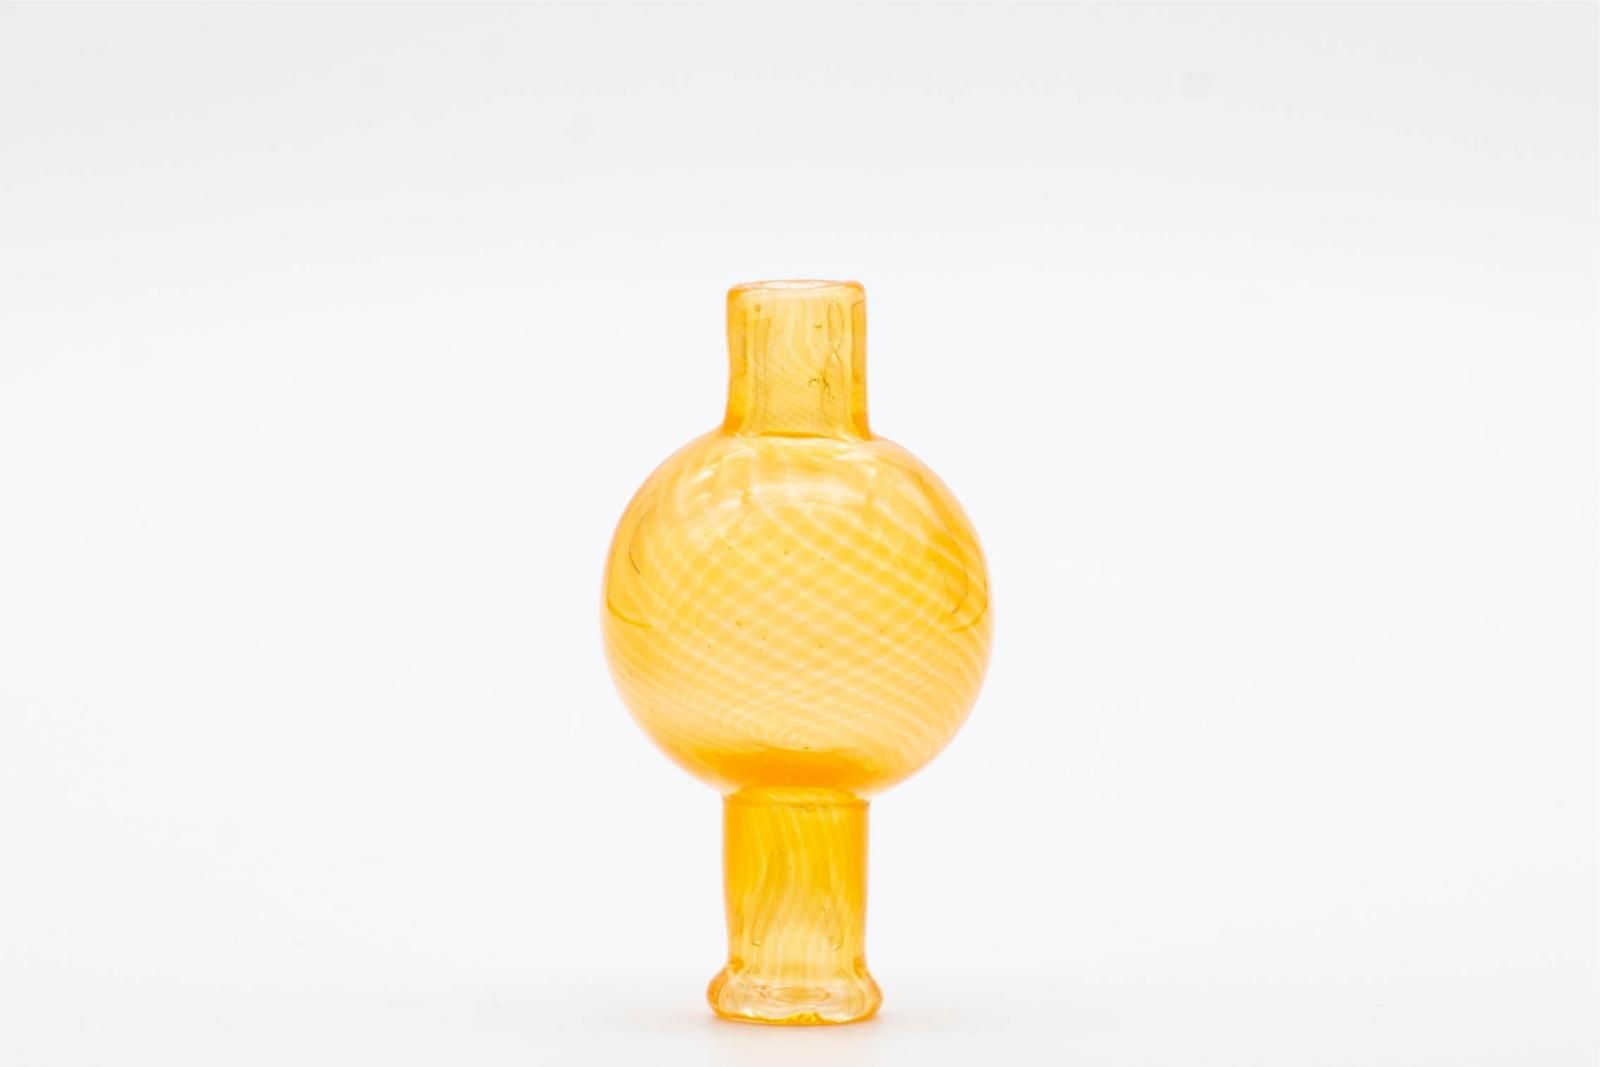 A tangie bubble cap, made by Bradfurd Glass, on a white background